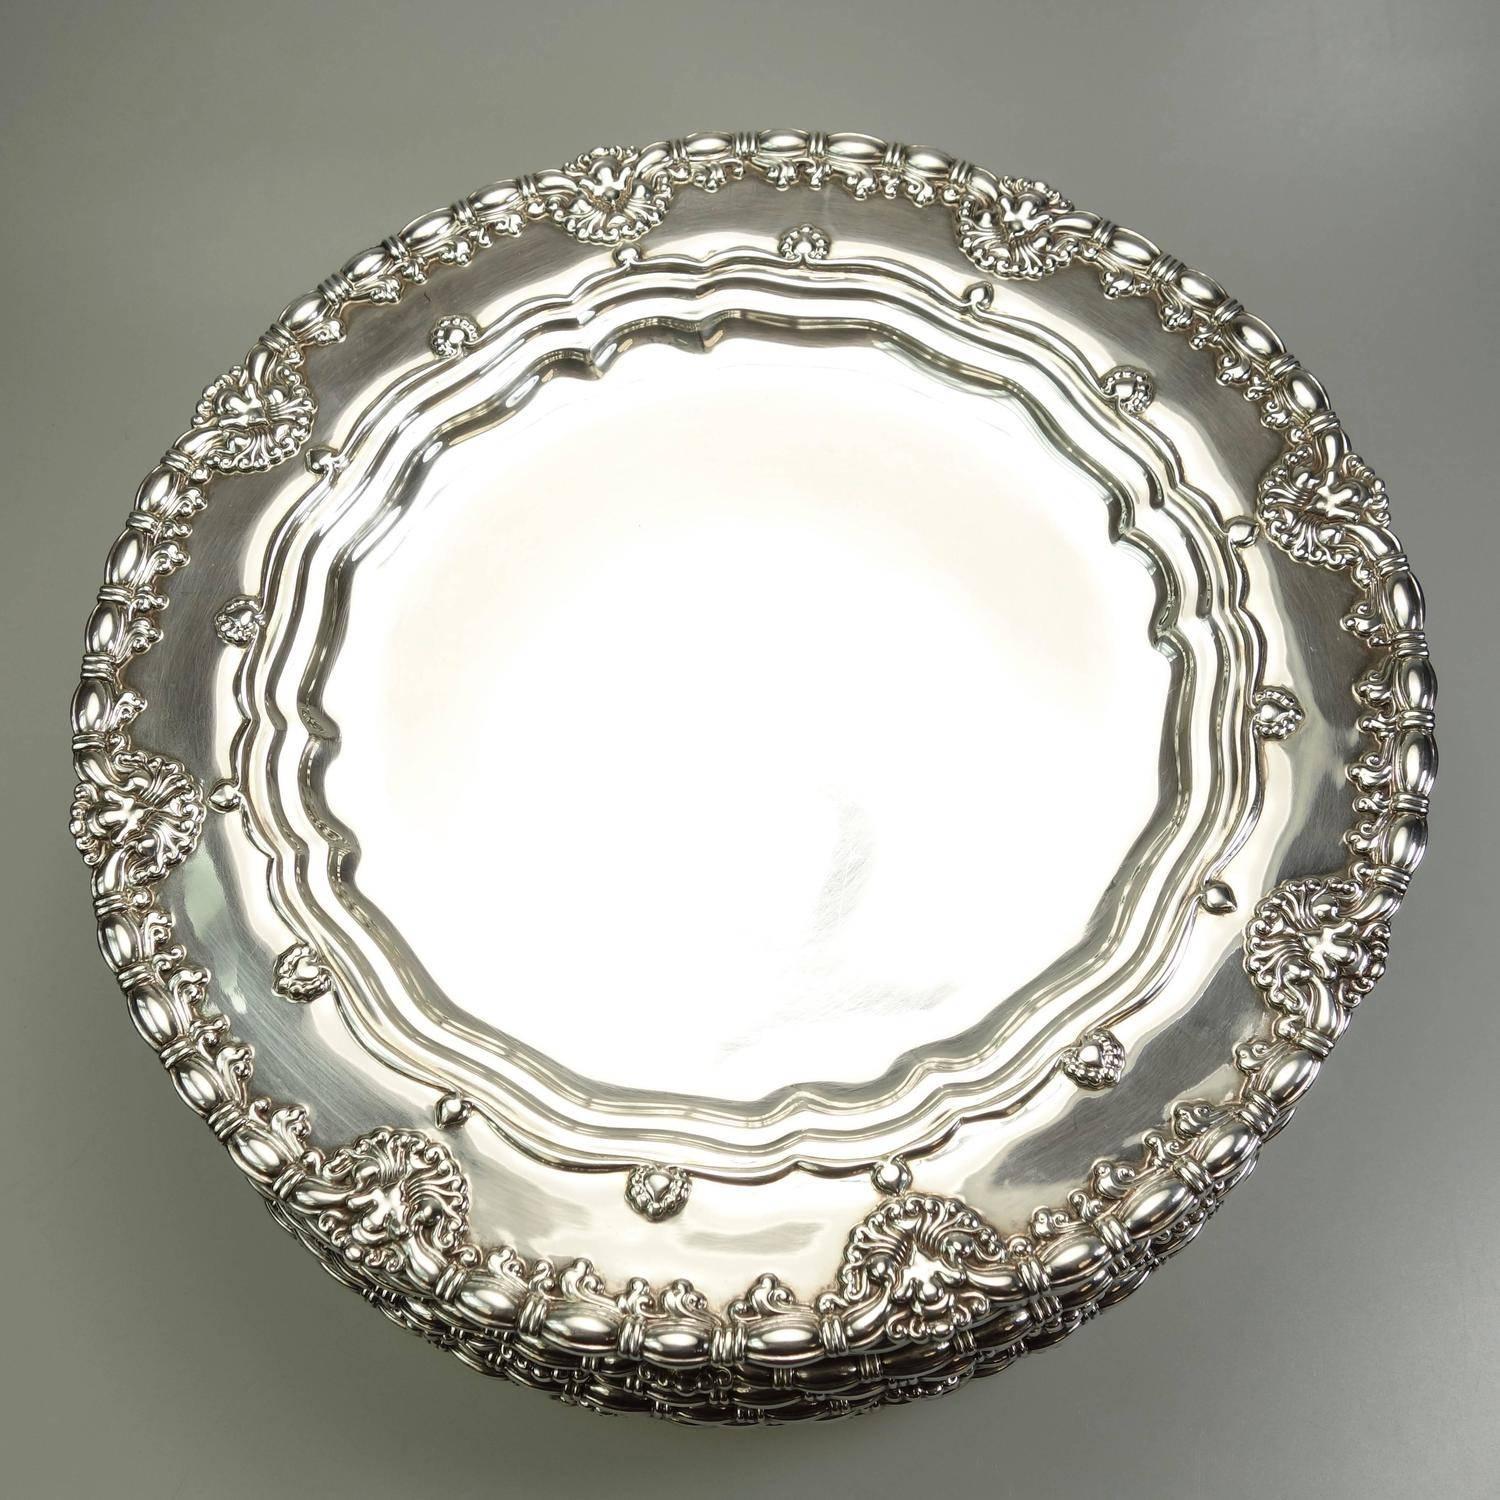 This magnificent set of Tiffany & Co. Sterling Silver plates has the same pattern as a set made for J.P.Morgan in 1895. The Morgan set is documented in Charles H. Carpenter, Jr.'s book, Tiffany Silver.   The plates are each fully hallmarked with: